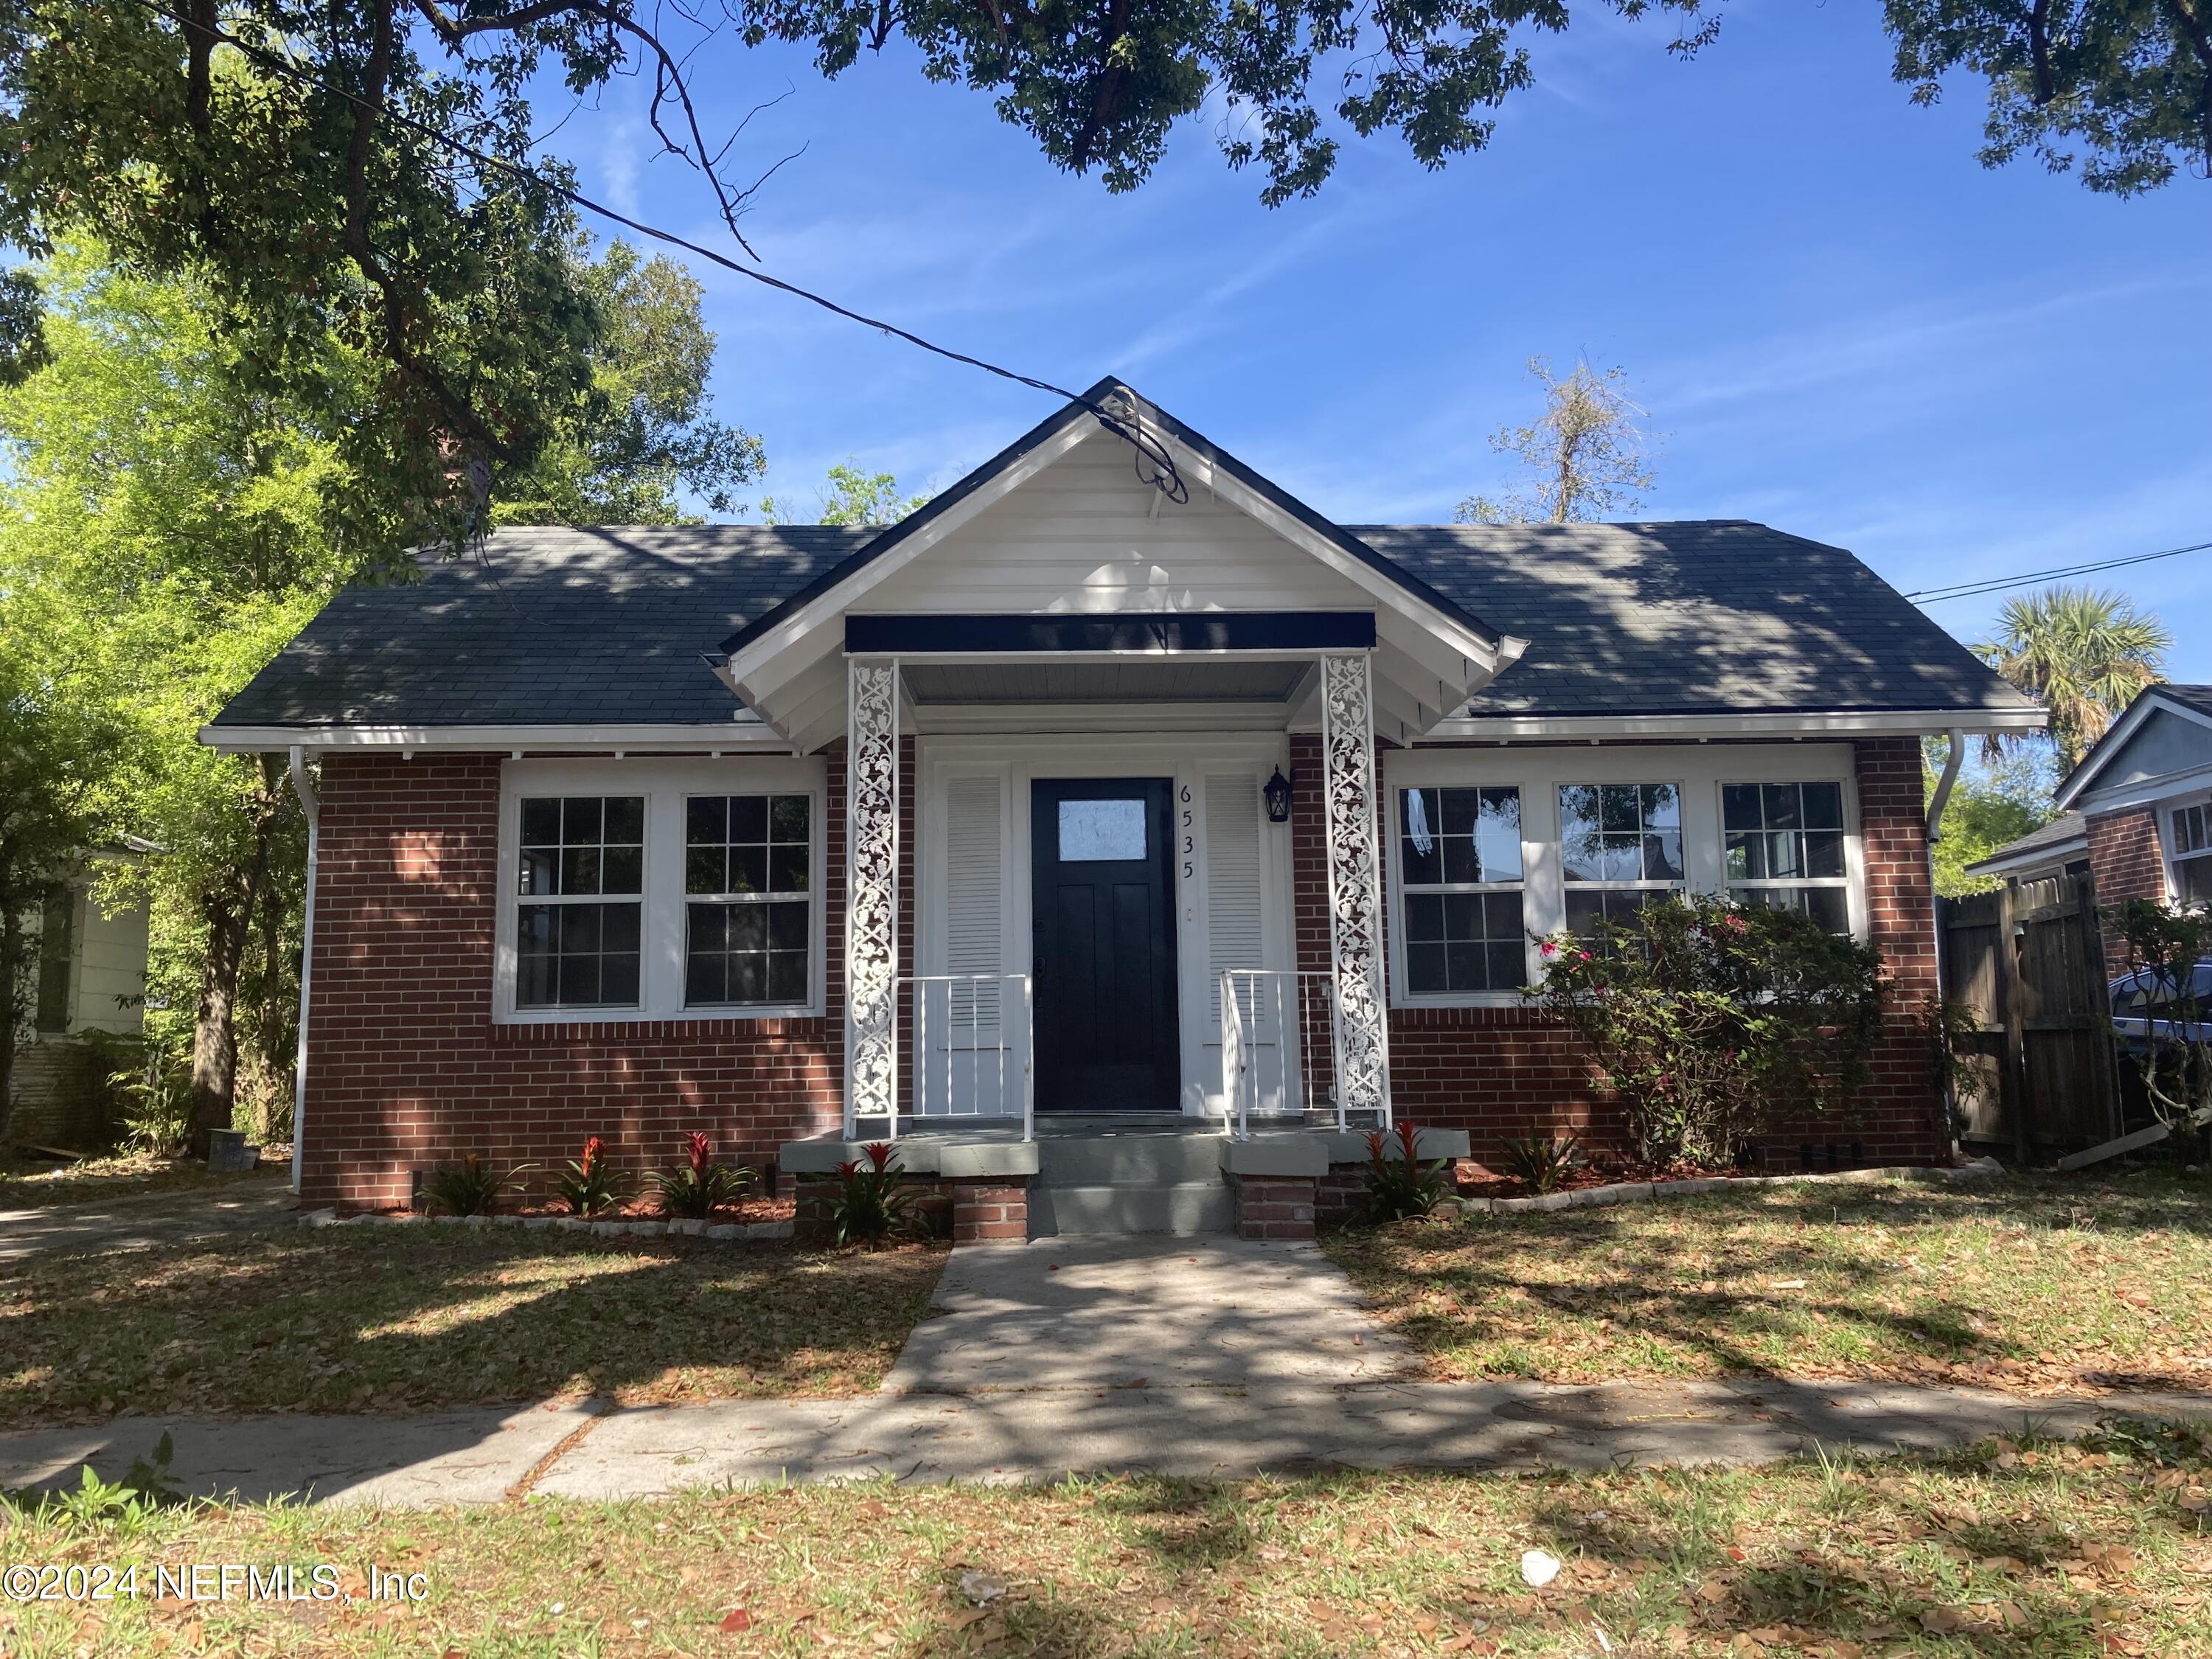 Jacksonville, FL home for sale located at 6535 Kathryn Drive, Jacksonville, FL 32208